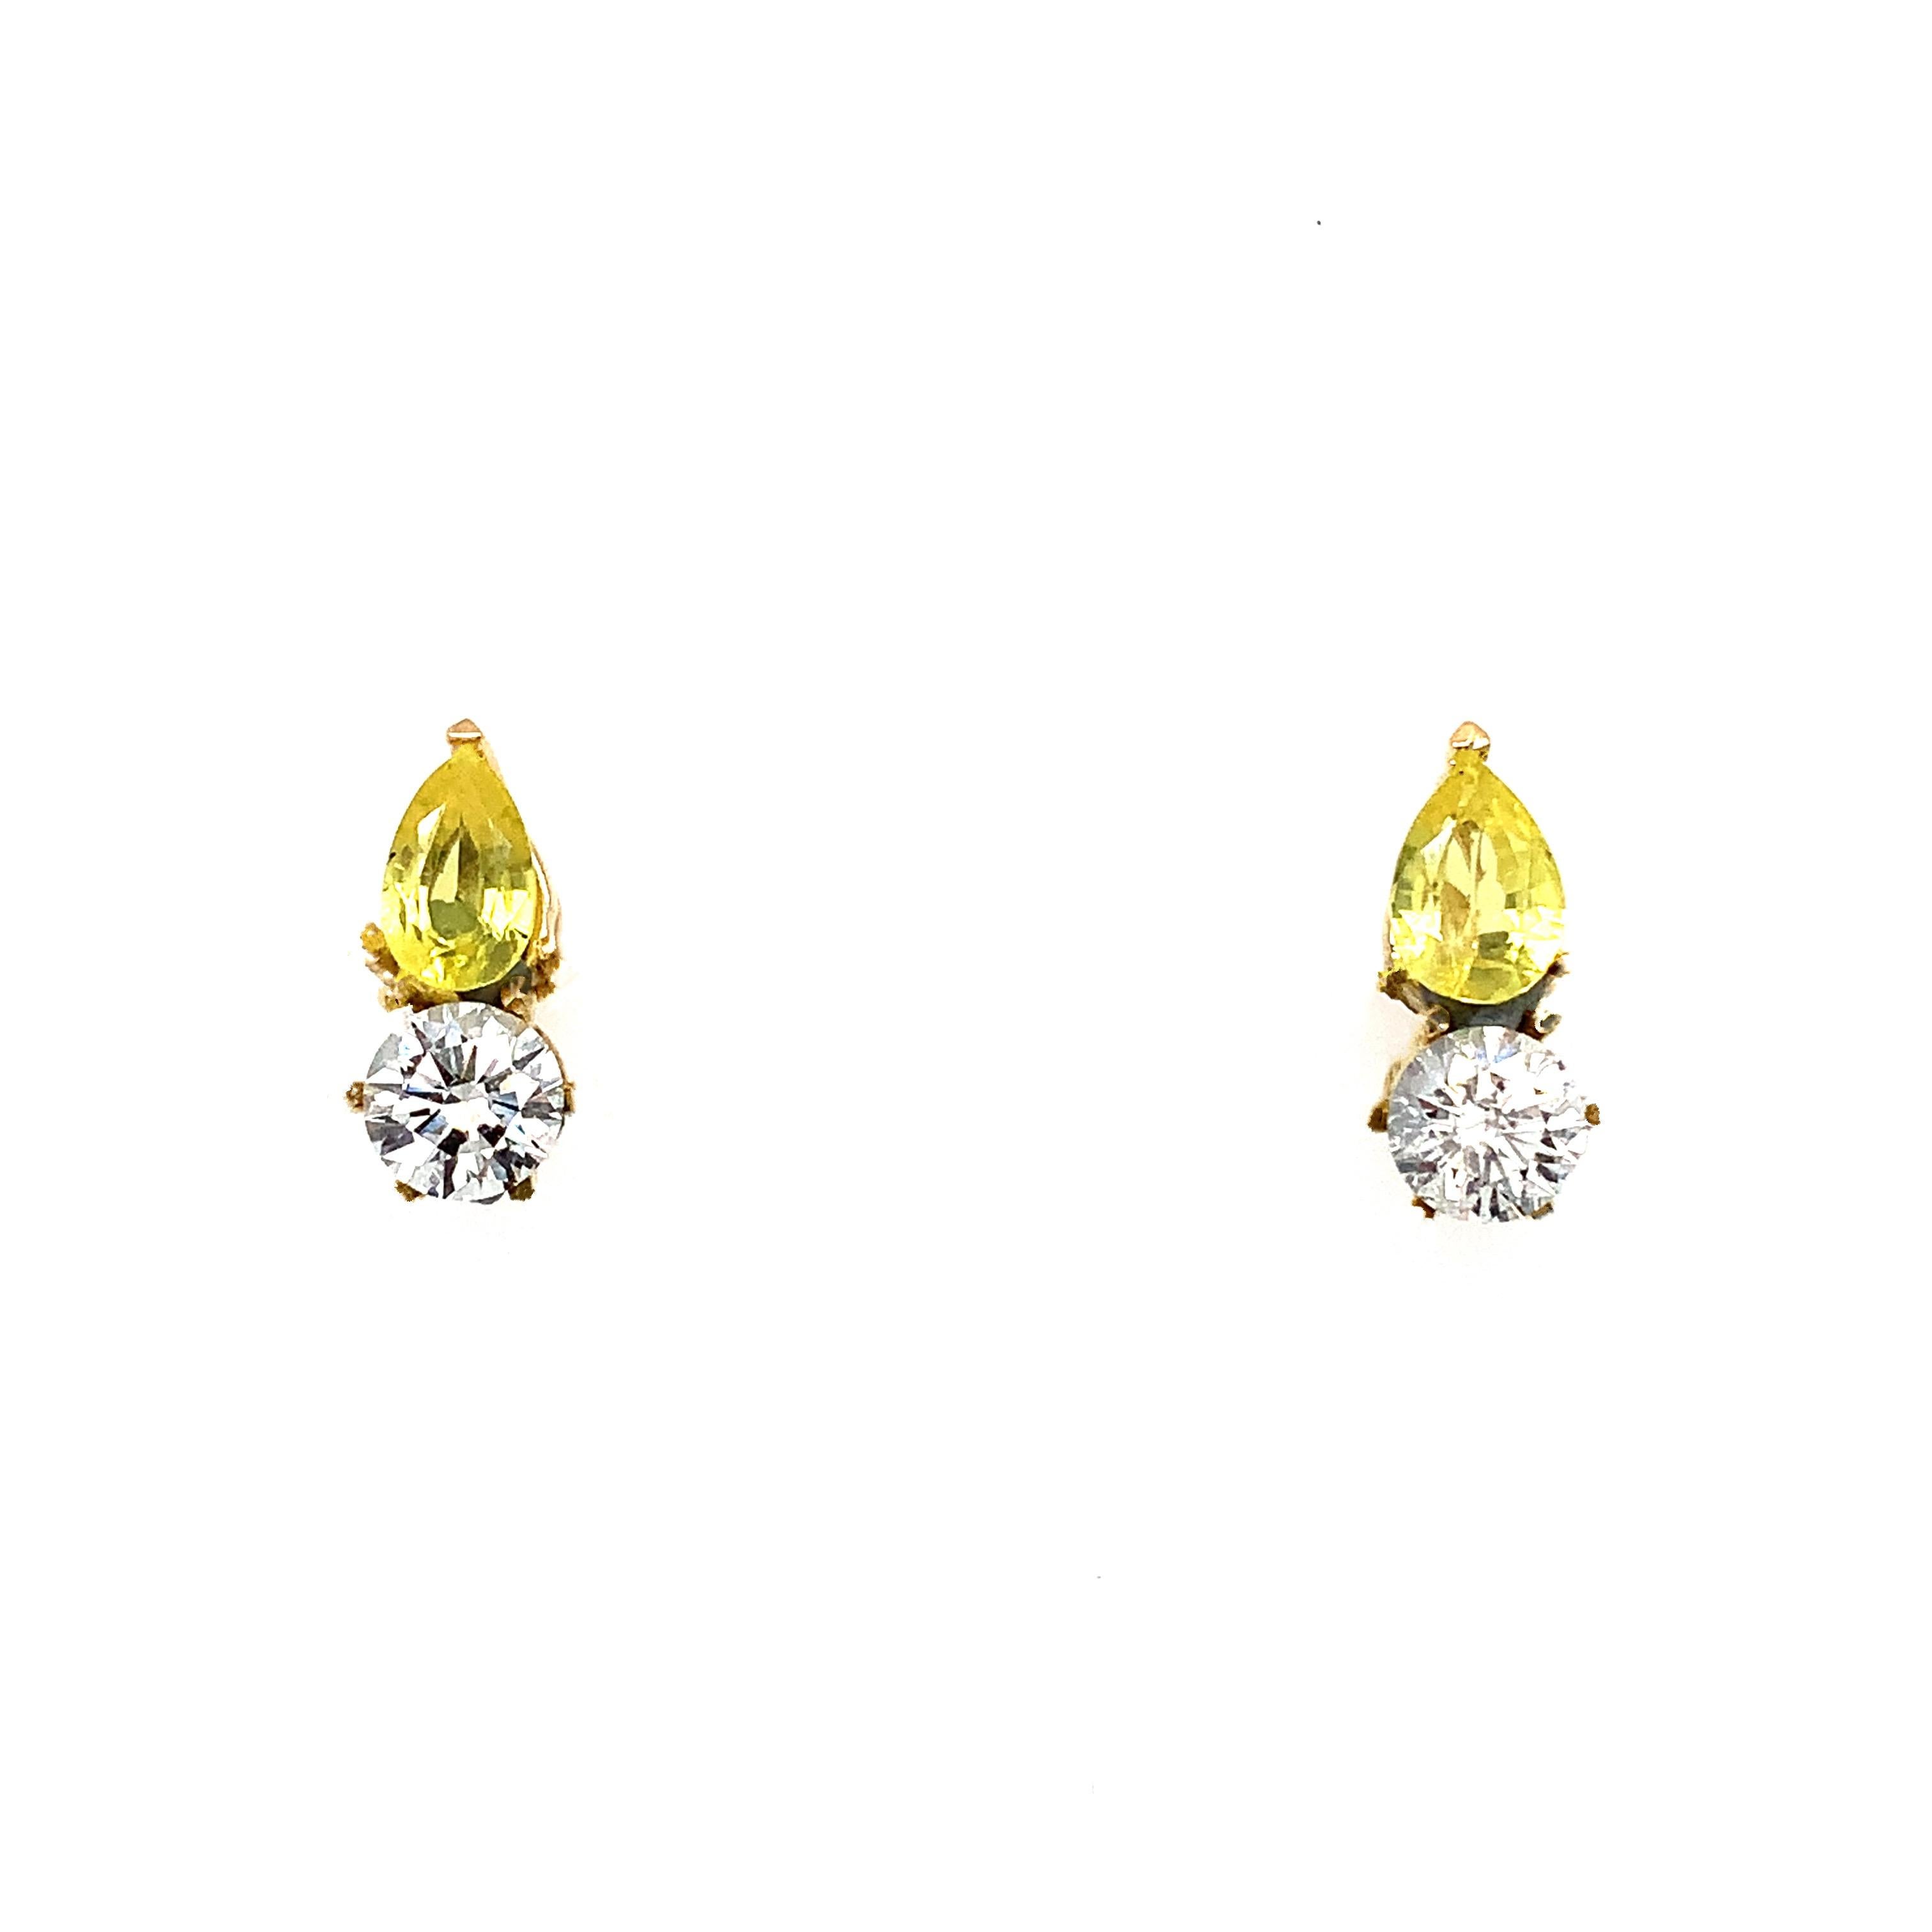 2.63ct Diamond and yellow sapphire art deco stud earrings 118k yellow gold
Gorgeous lemon yellow sapphire gemstone with round diamonds stud earrings art deco style earring in 18k yellow gold.
Yellow sapphire natural gemstone pear shaped total weight